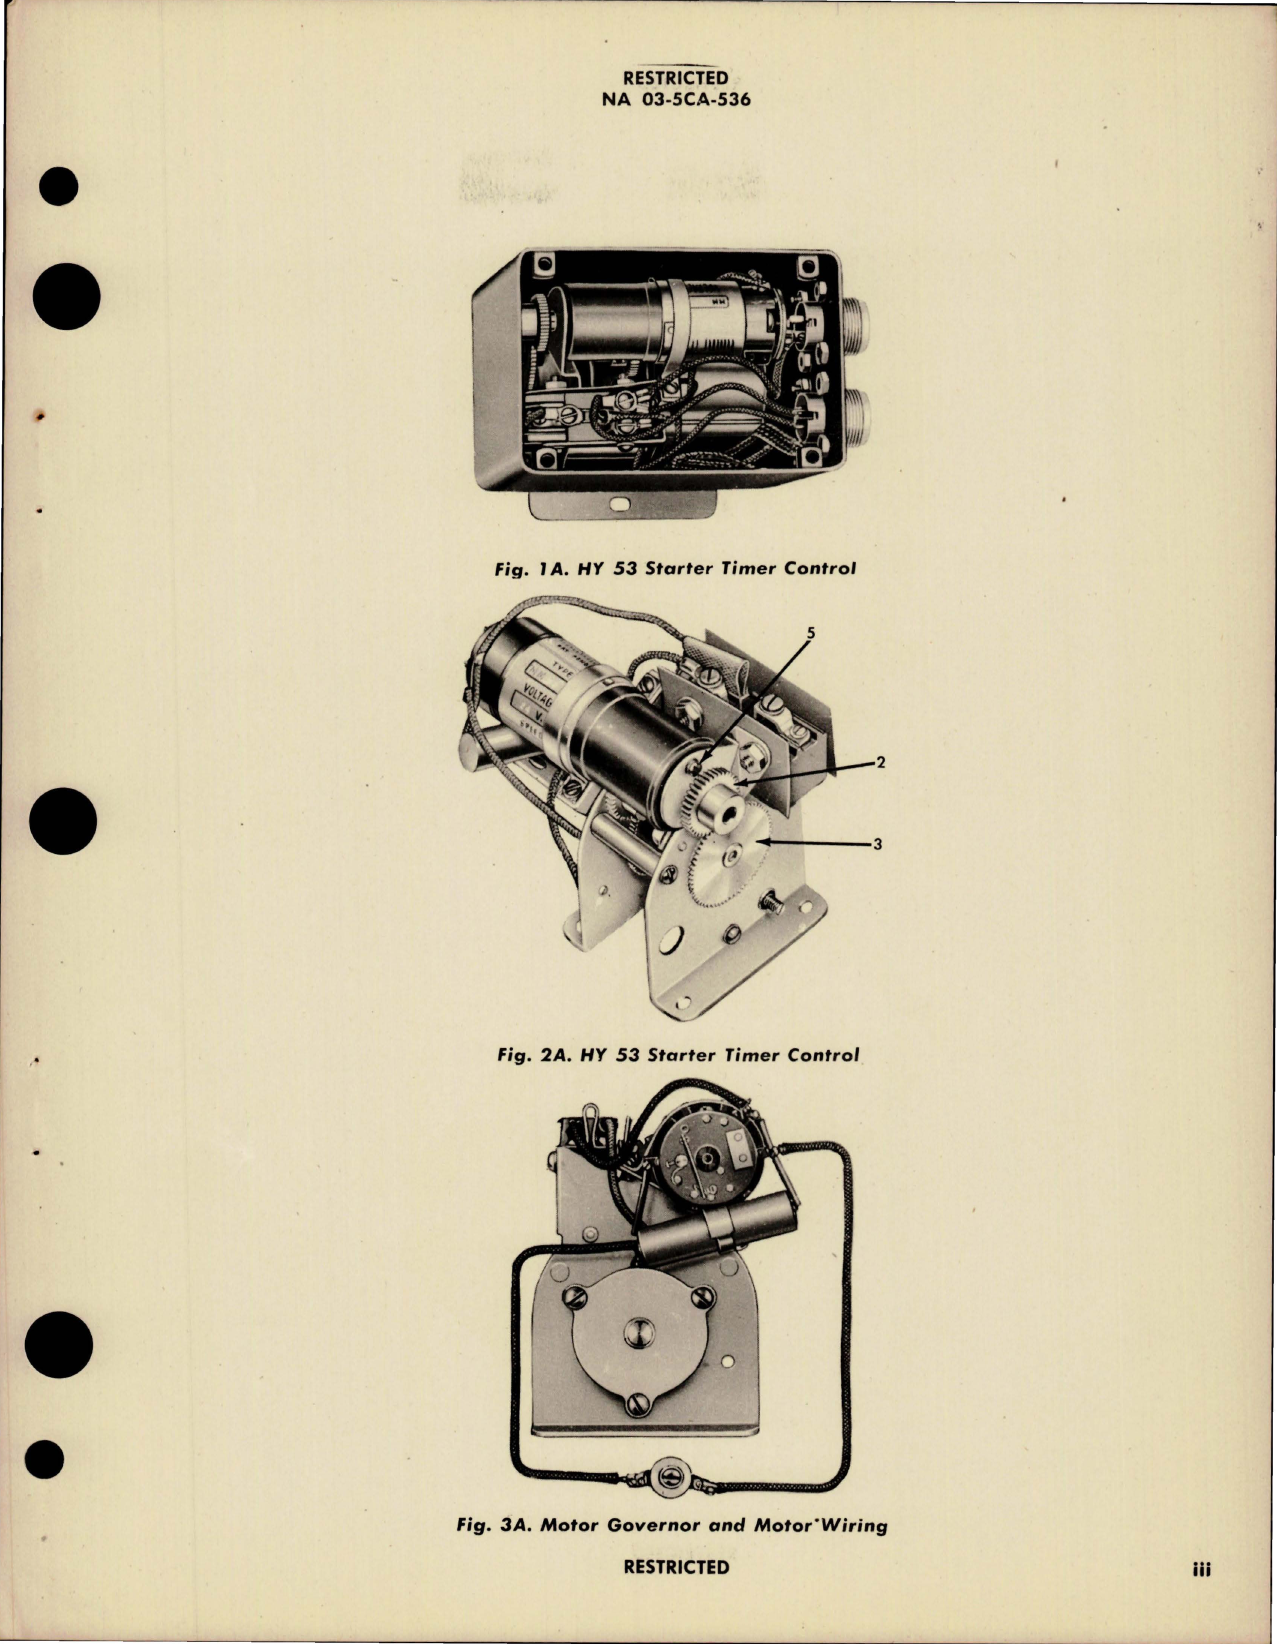 Sample page 5 from AirCorps Library document: Operation, Service, Overhaul Instructions with Parts for Starter Timer Control - Model HY-51 